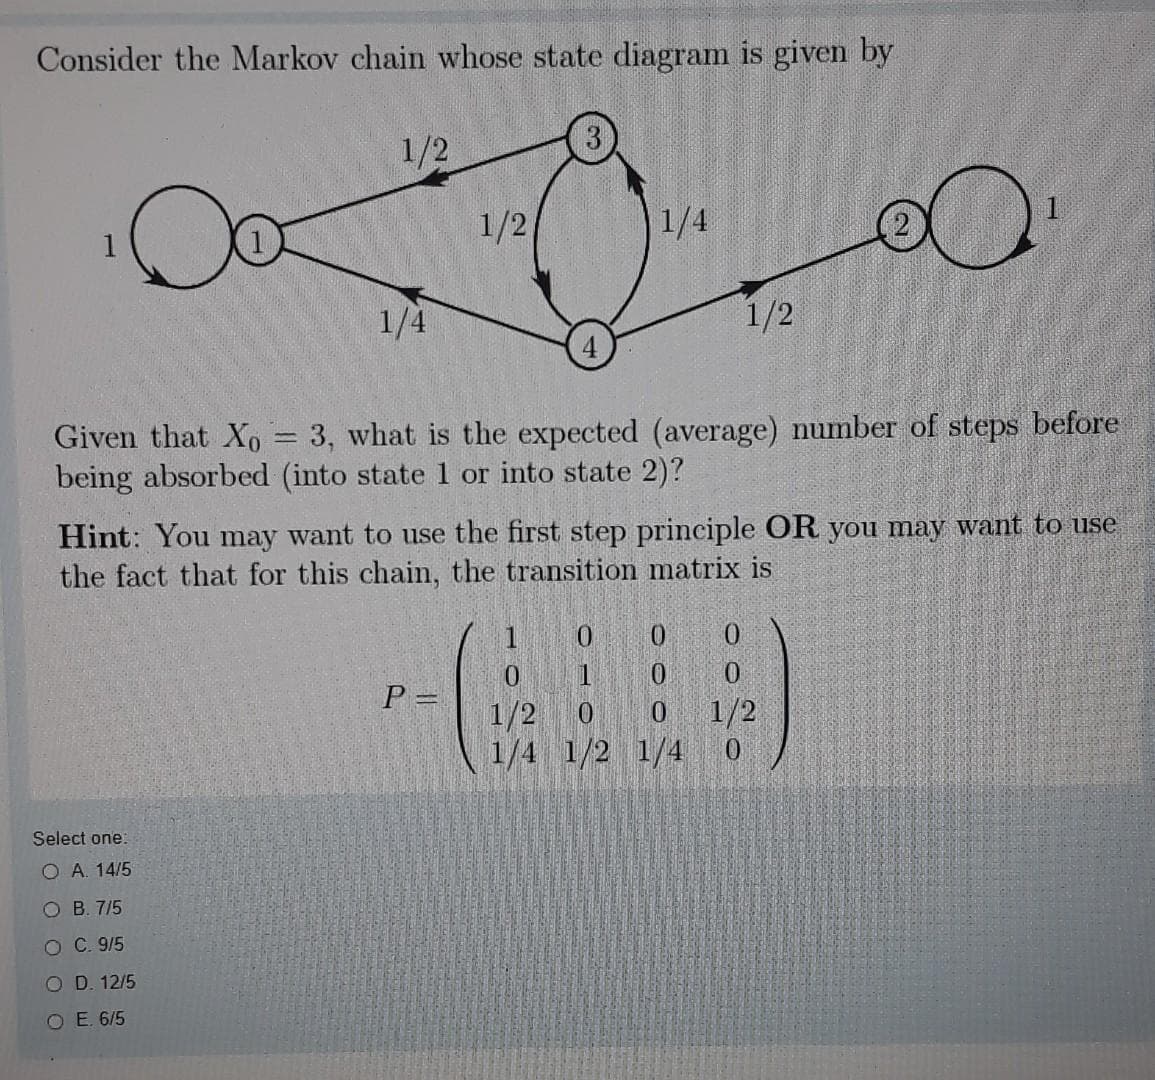 Consider the Markov chain whose state diagram is given by
1/2
1/2
1/4
1
1/4
1/2
Given that Xo 3, what is the expected (average) number of steps before
being absorbed (into state 1 or into state 2)?
Hint: You may want to use the first step principle OR you may want to use
the fact that for this chain, the transition matrix is
0.
0.
0.
%3D
1/2
1/2
1/4 1/2 1/4
0.
0.
Select one:
O A. 14/5
O B. 7/5
O C. 9/5
O D. 12/5
O E. 6/5
